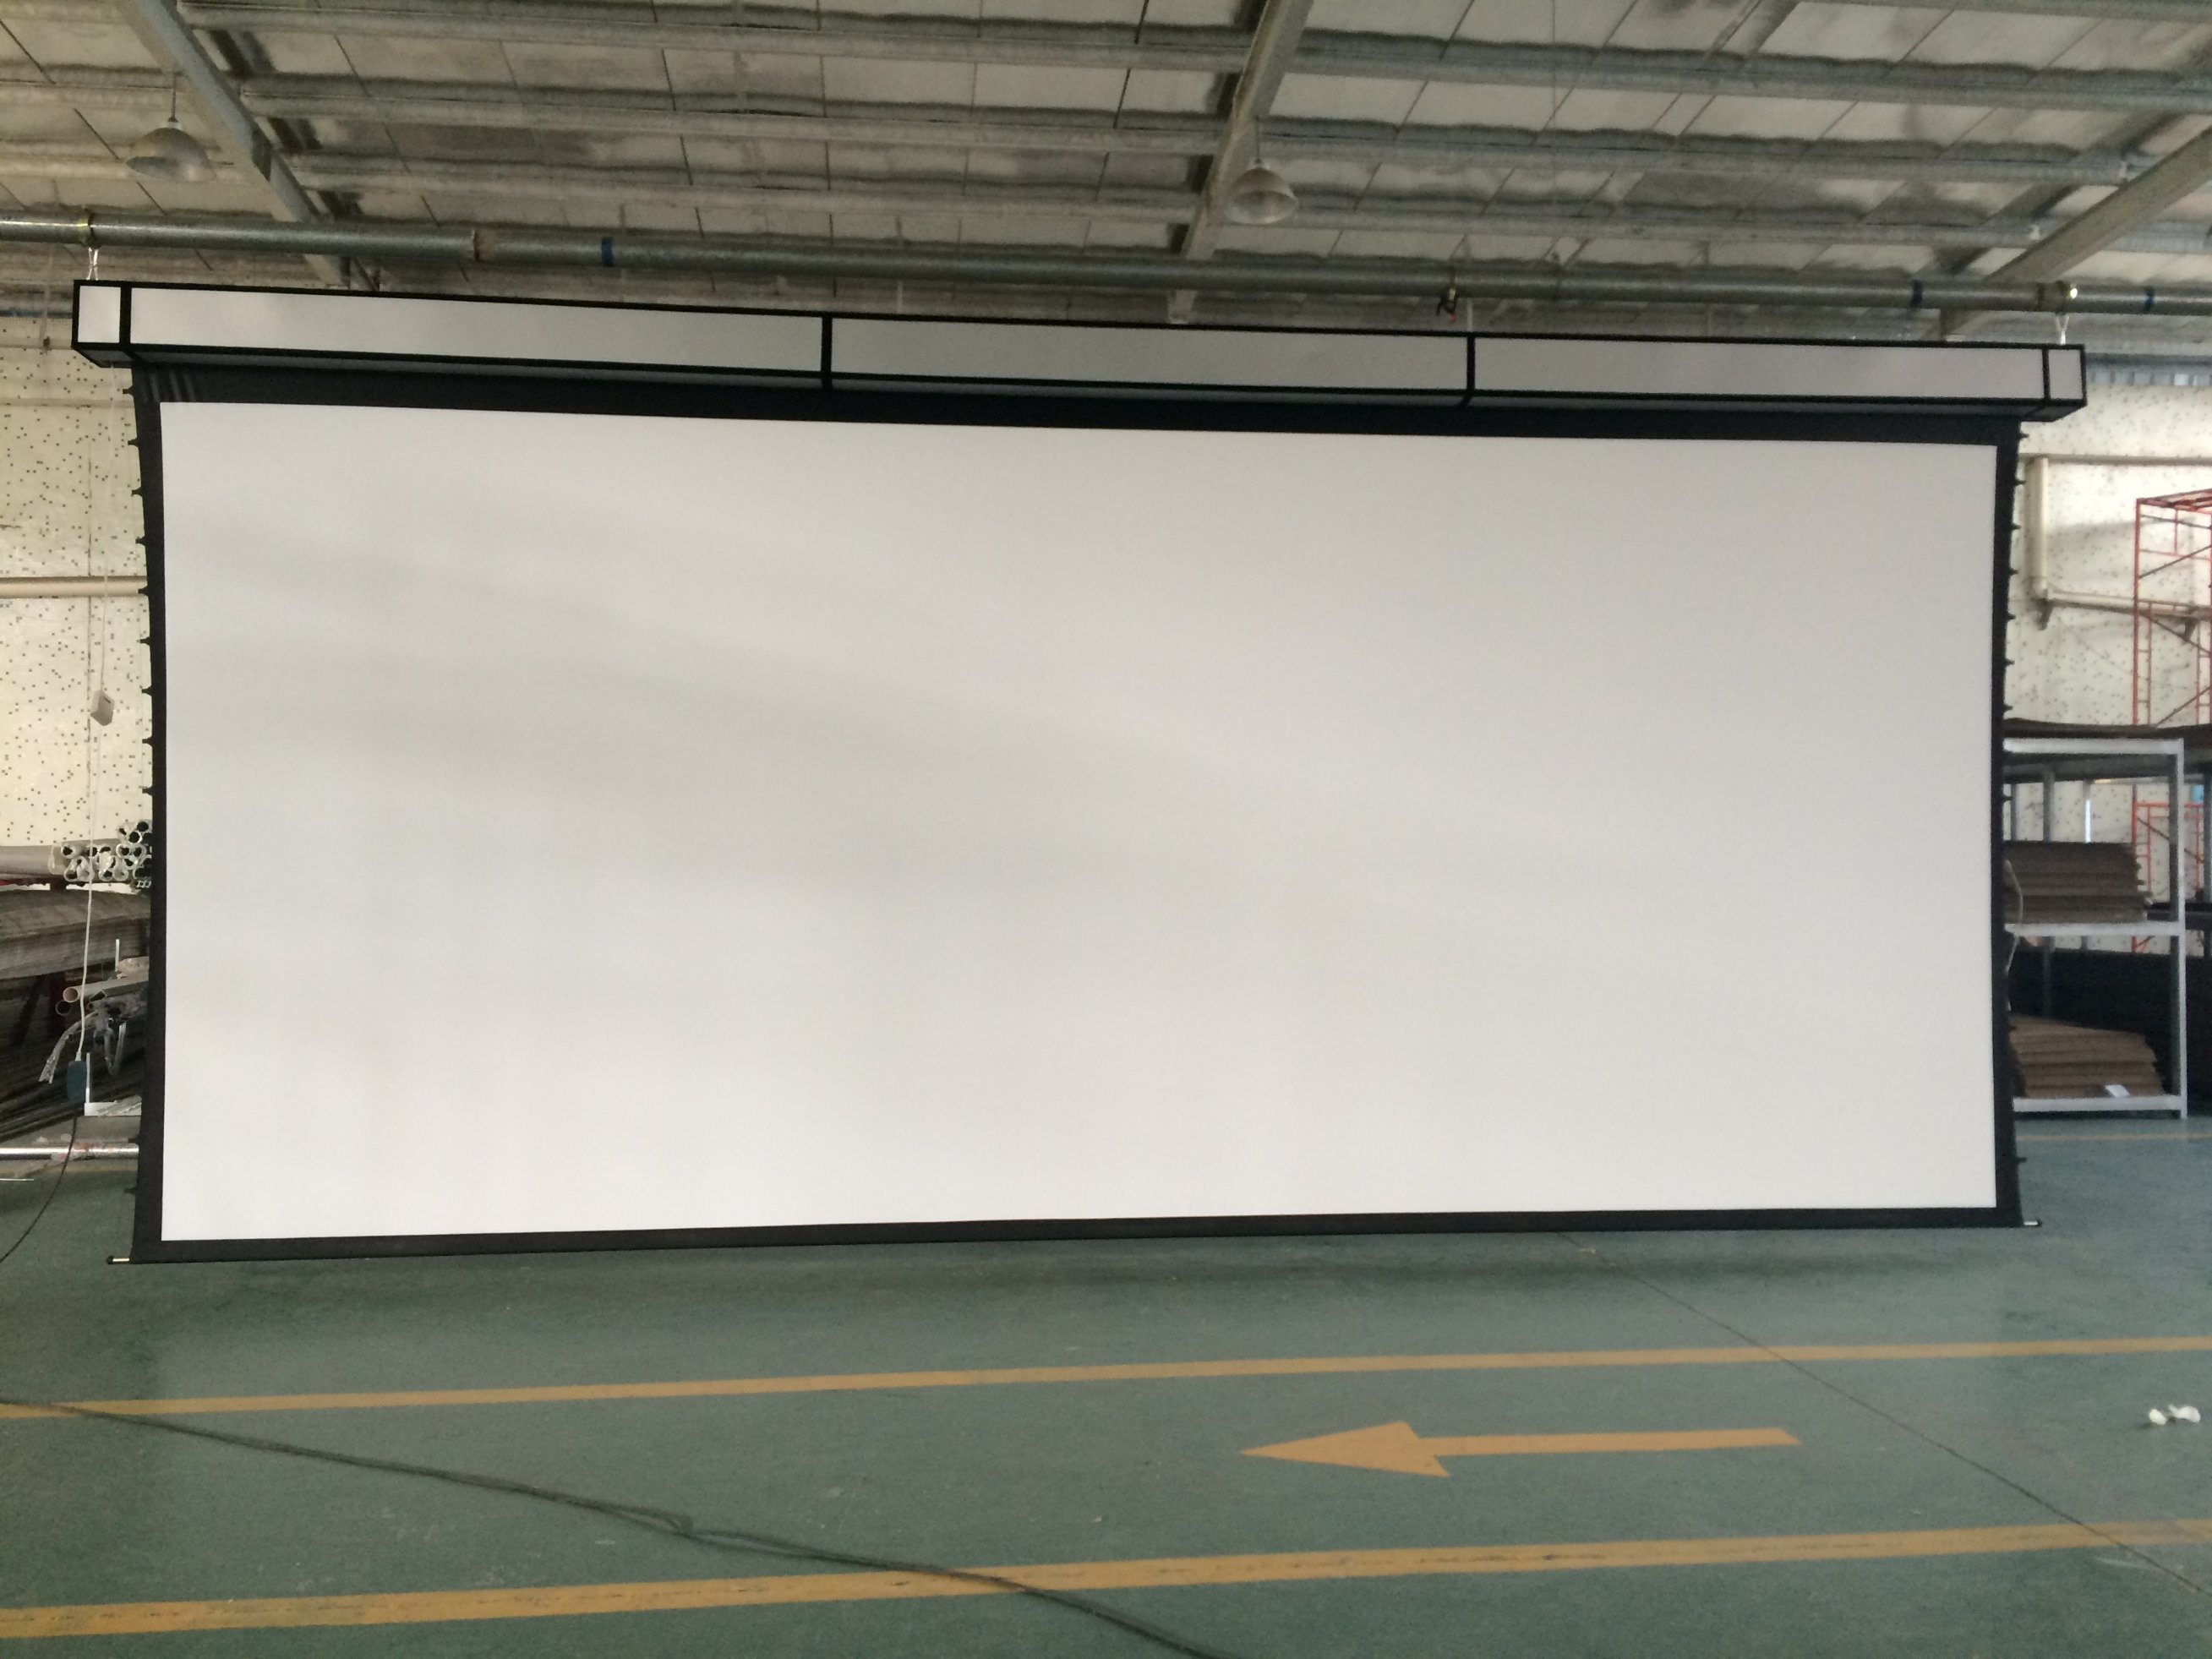 Imax Big Size Cinema Projection Screen Size From 150''-350''